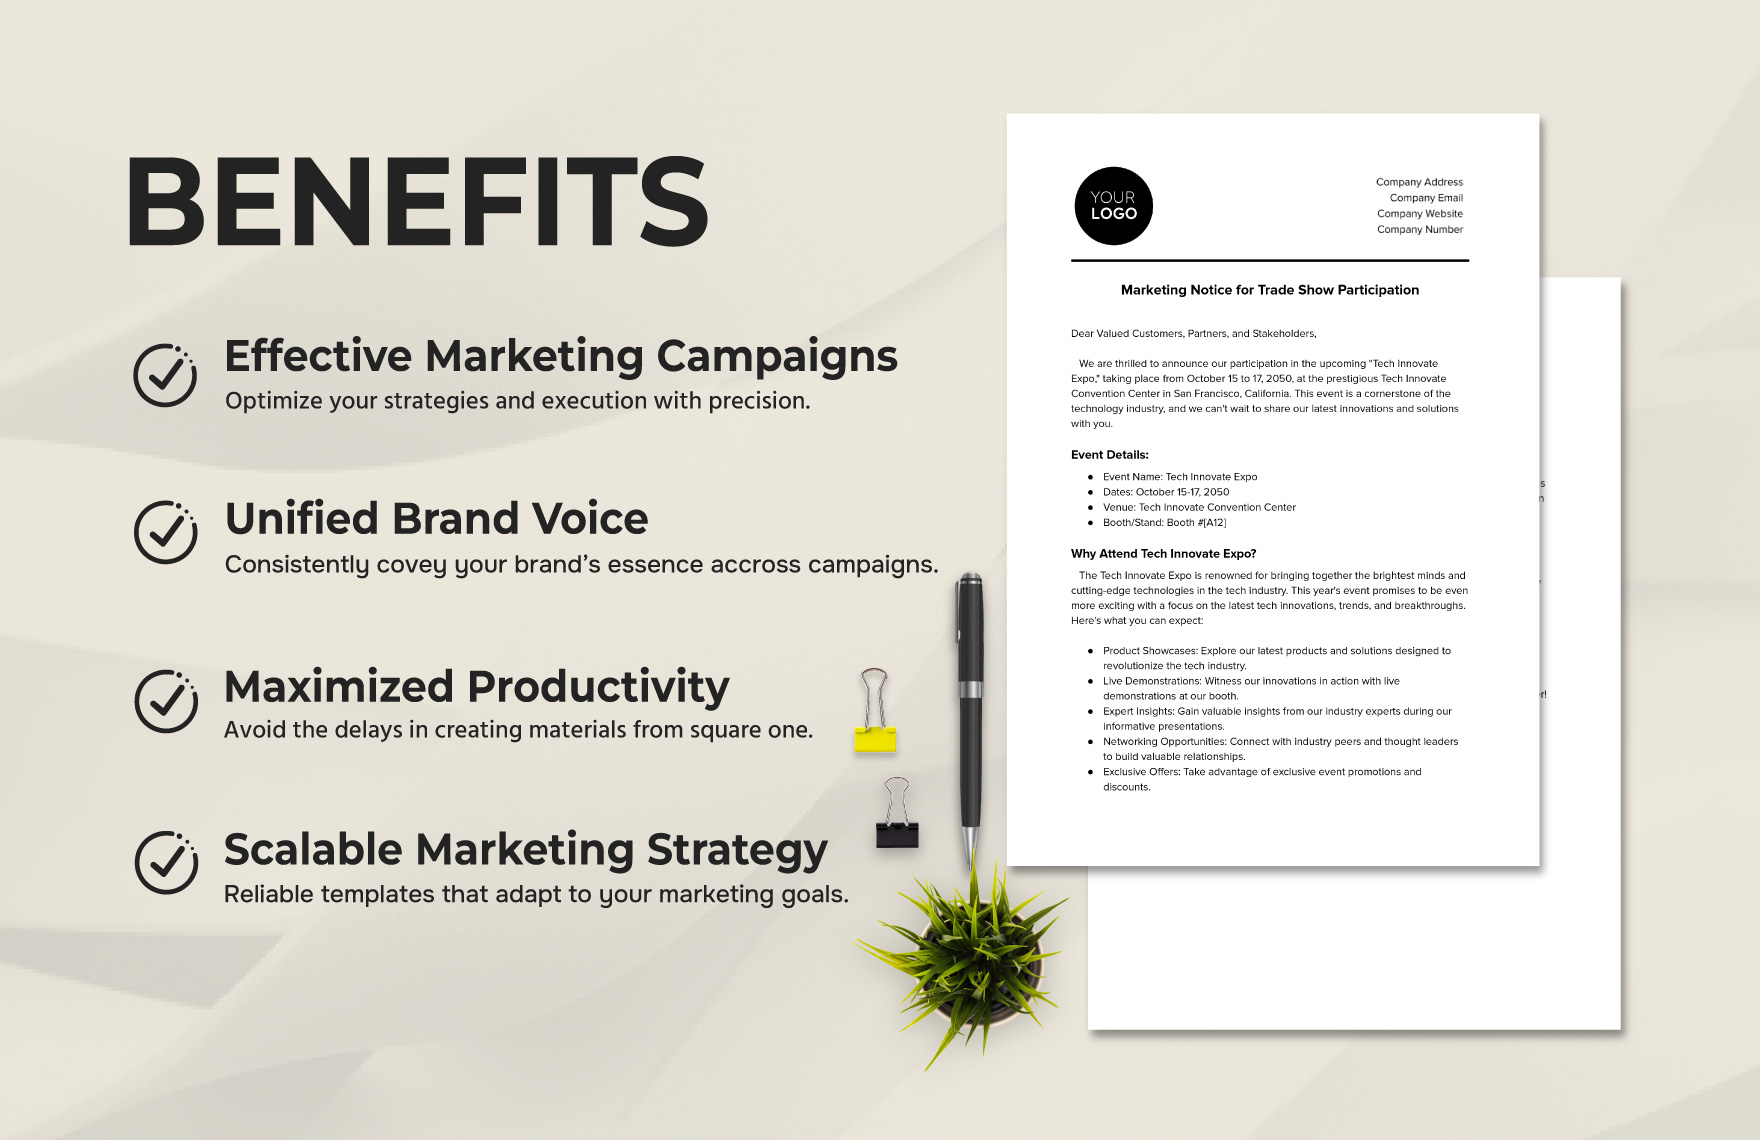 Marketing Notice for Trade Show Participation Template